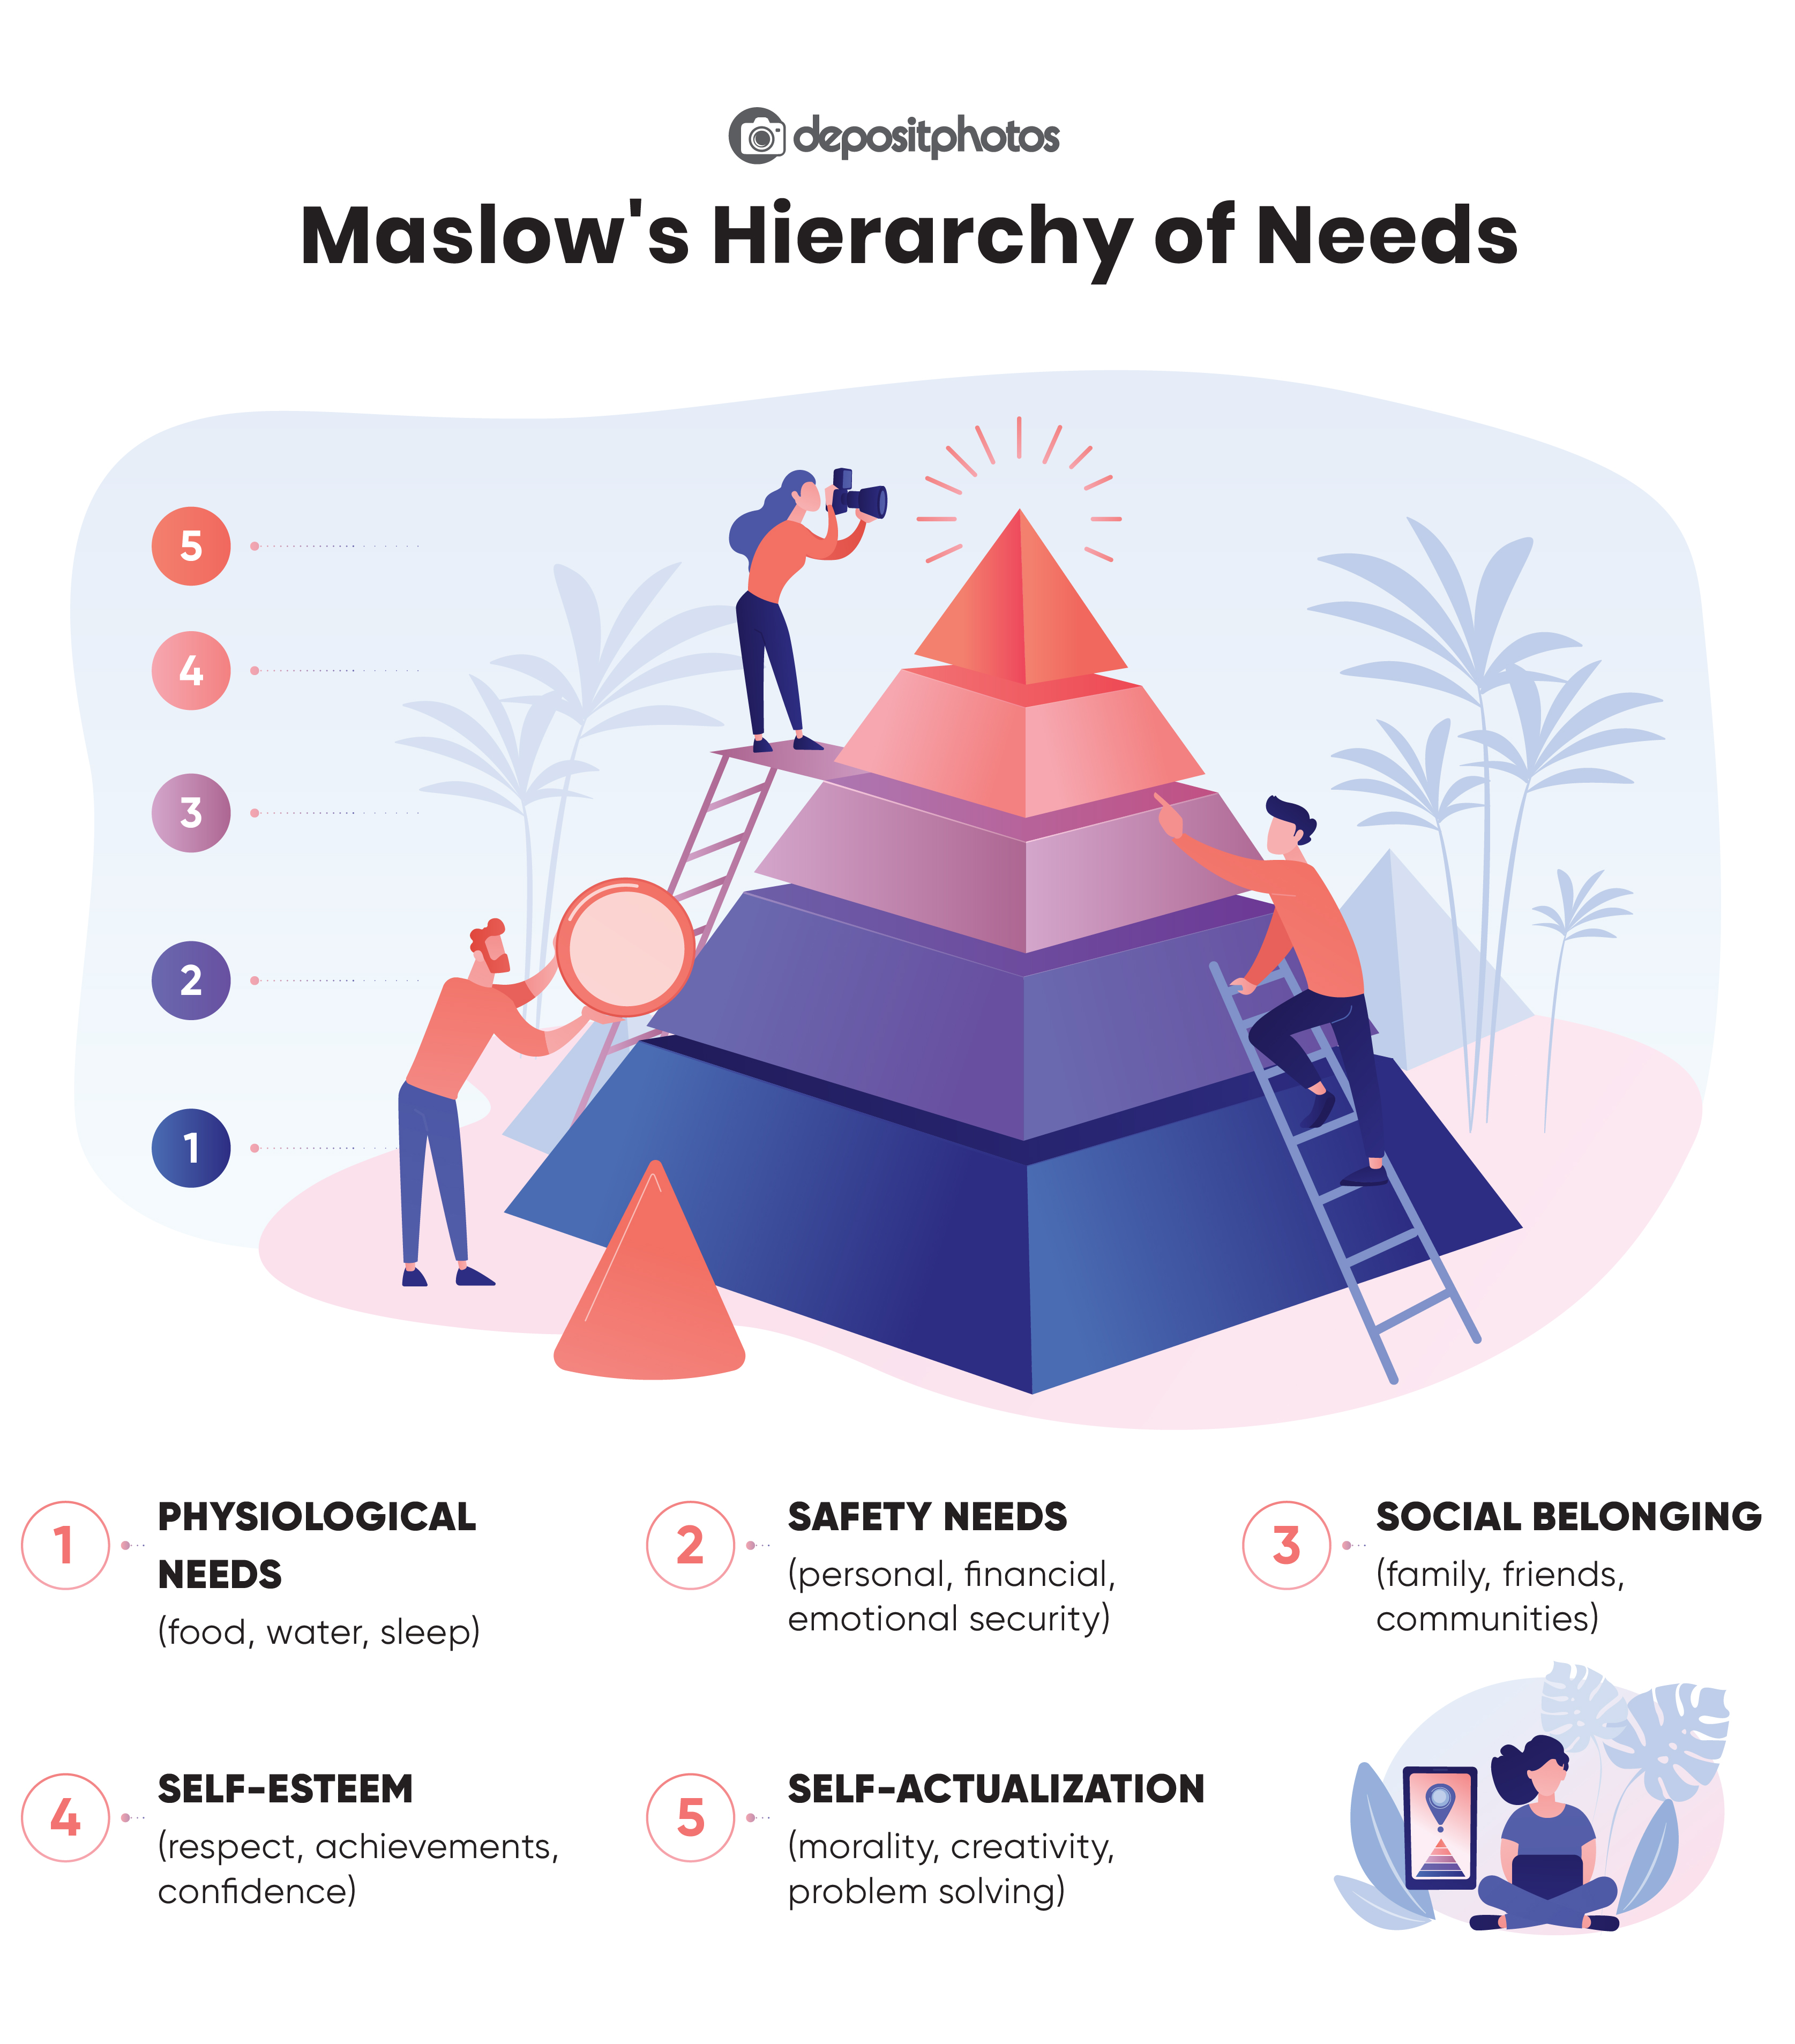 Maslow’s hierarchy of needs pyramid